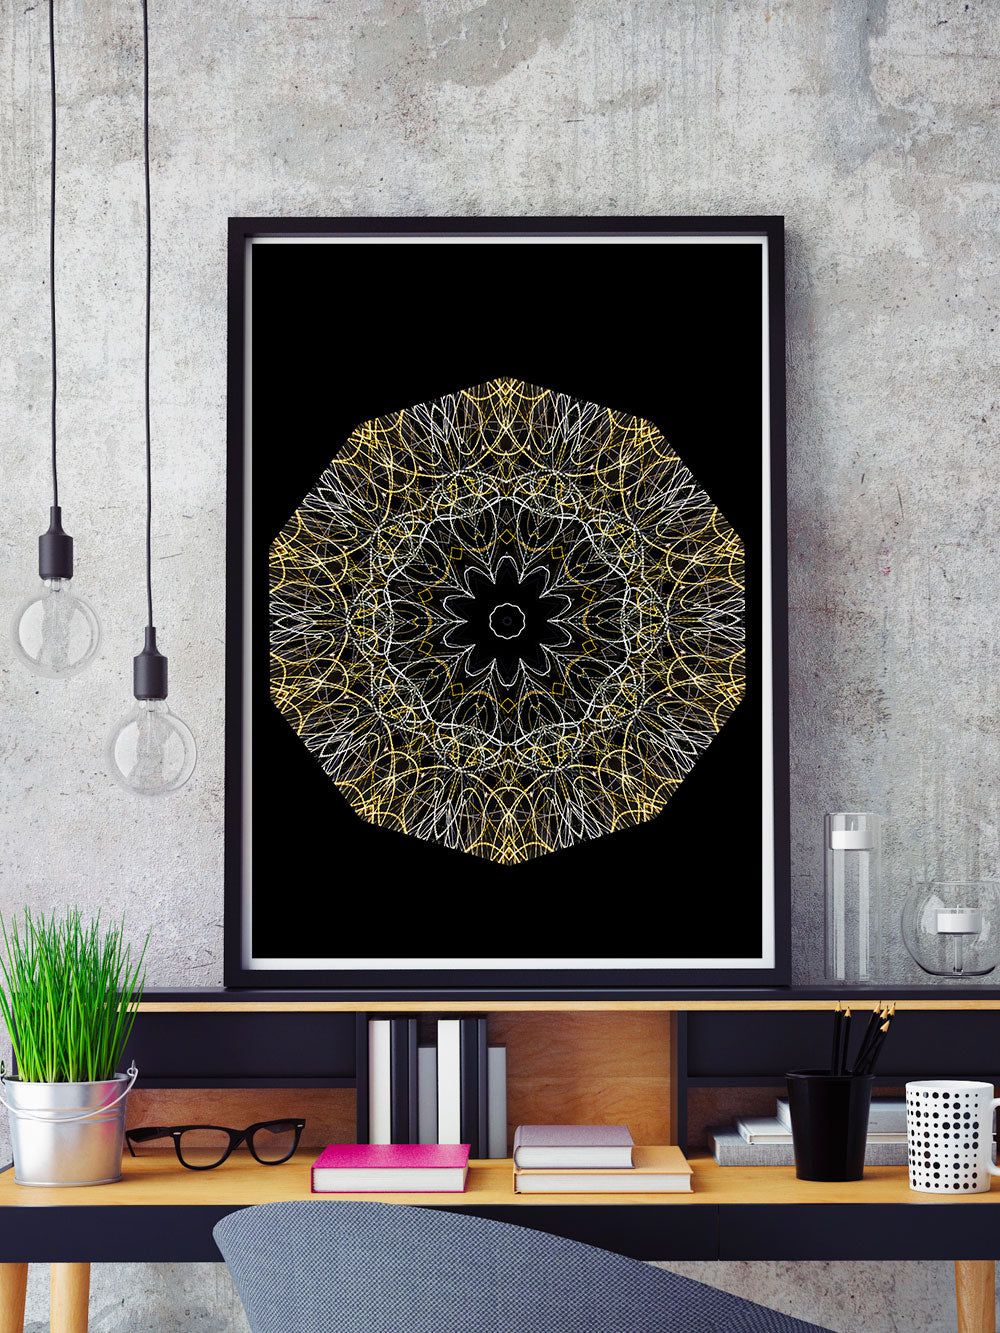 Hyperion Abstract Wall Print in a frame on a shelf